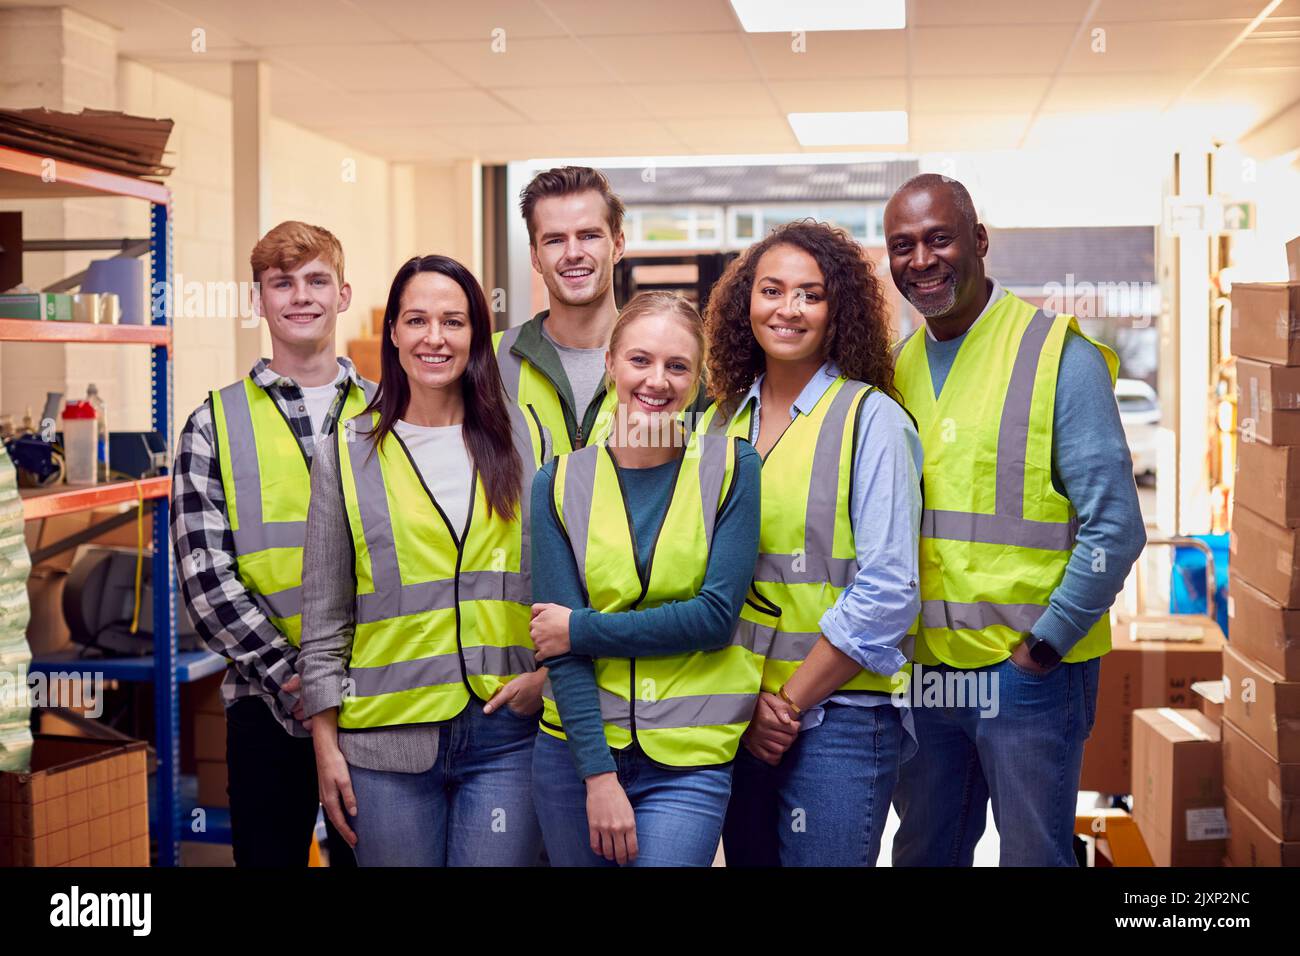 Portrait Of Multi-Cultural Team Wearing Hi-Vis Safety Clothing Working In Modern Warehouse Stock Photo